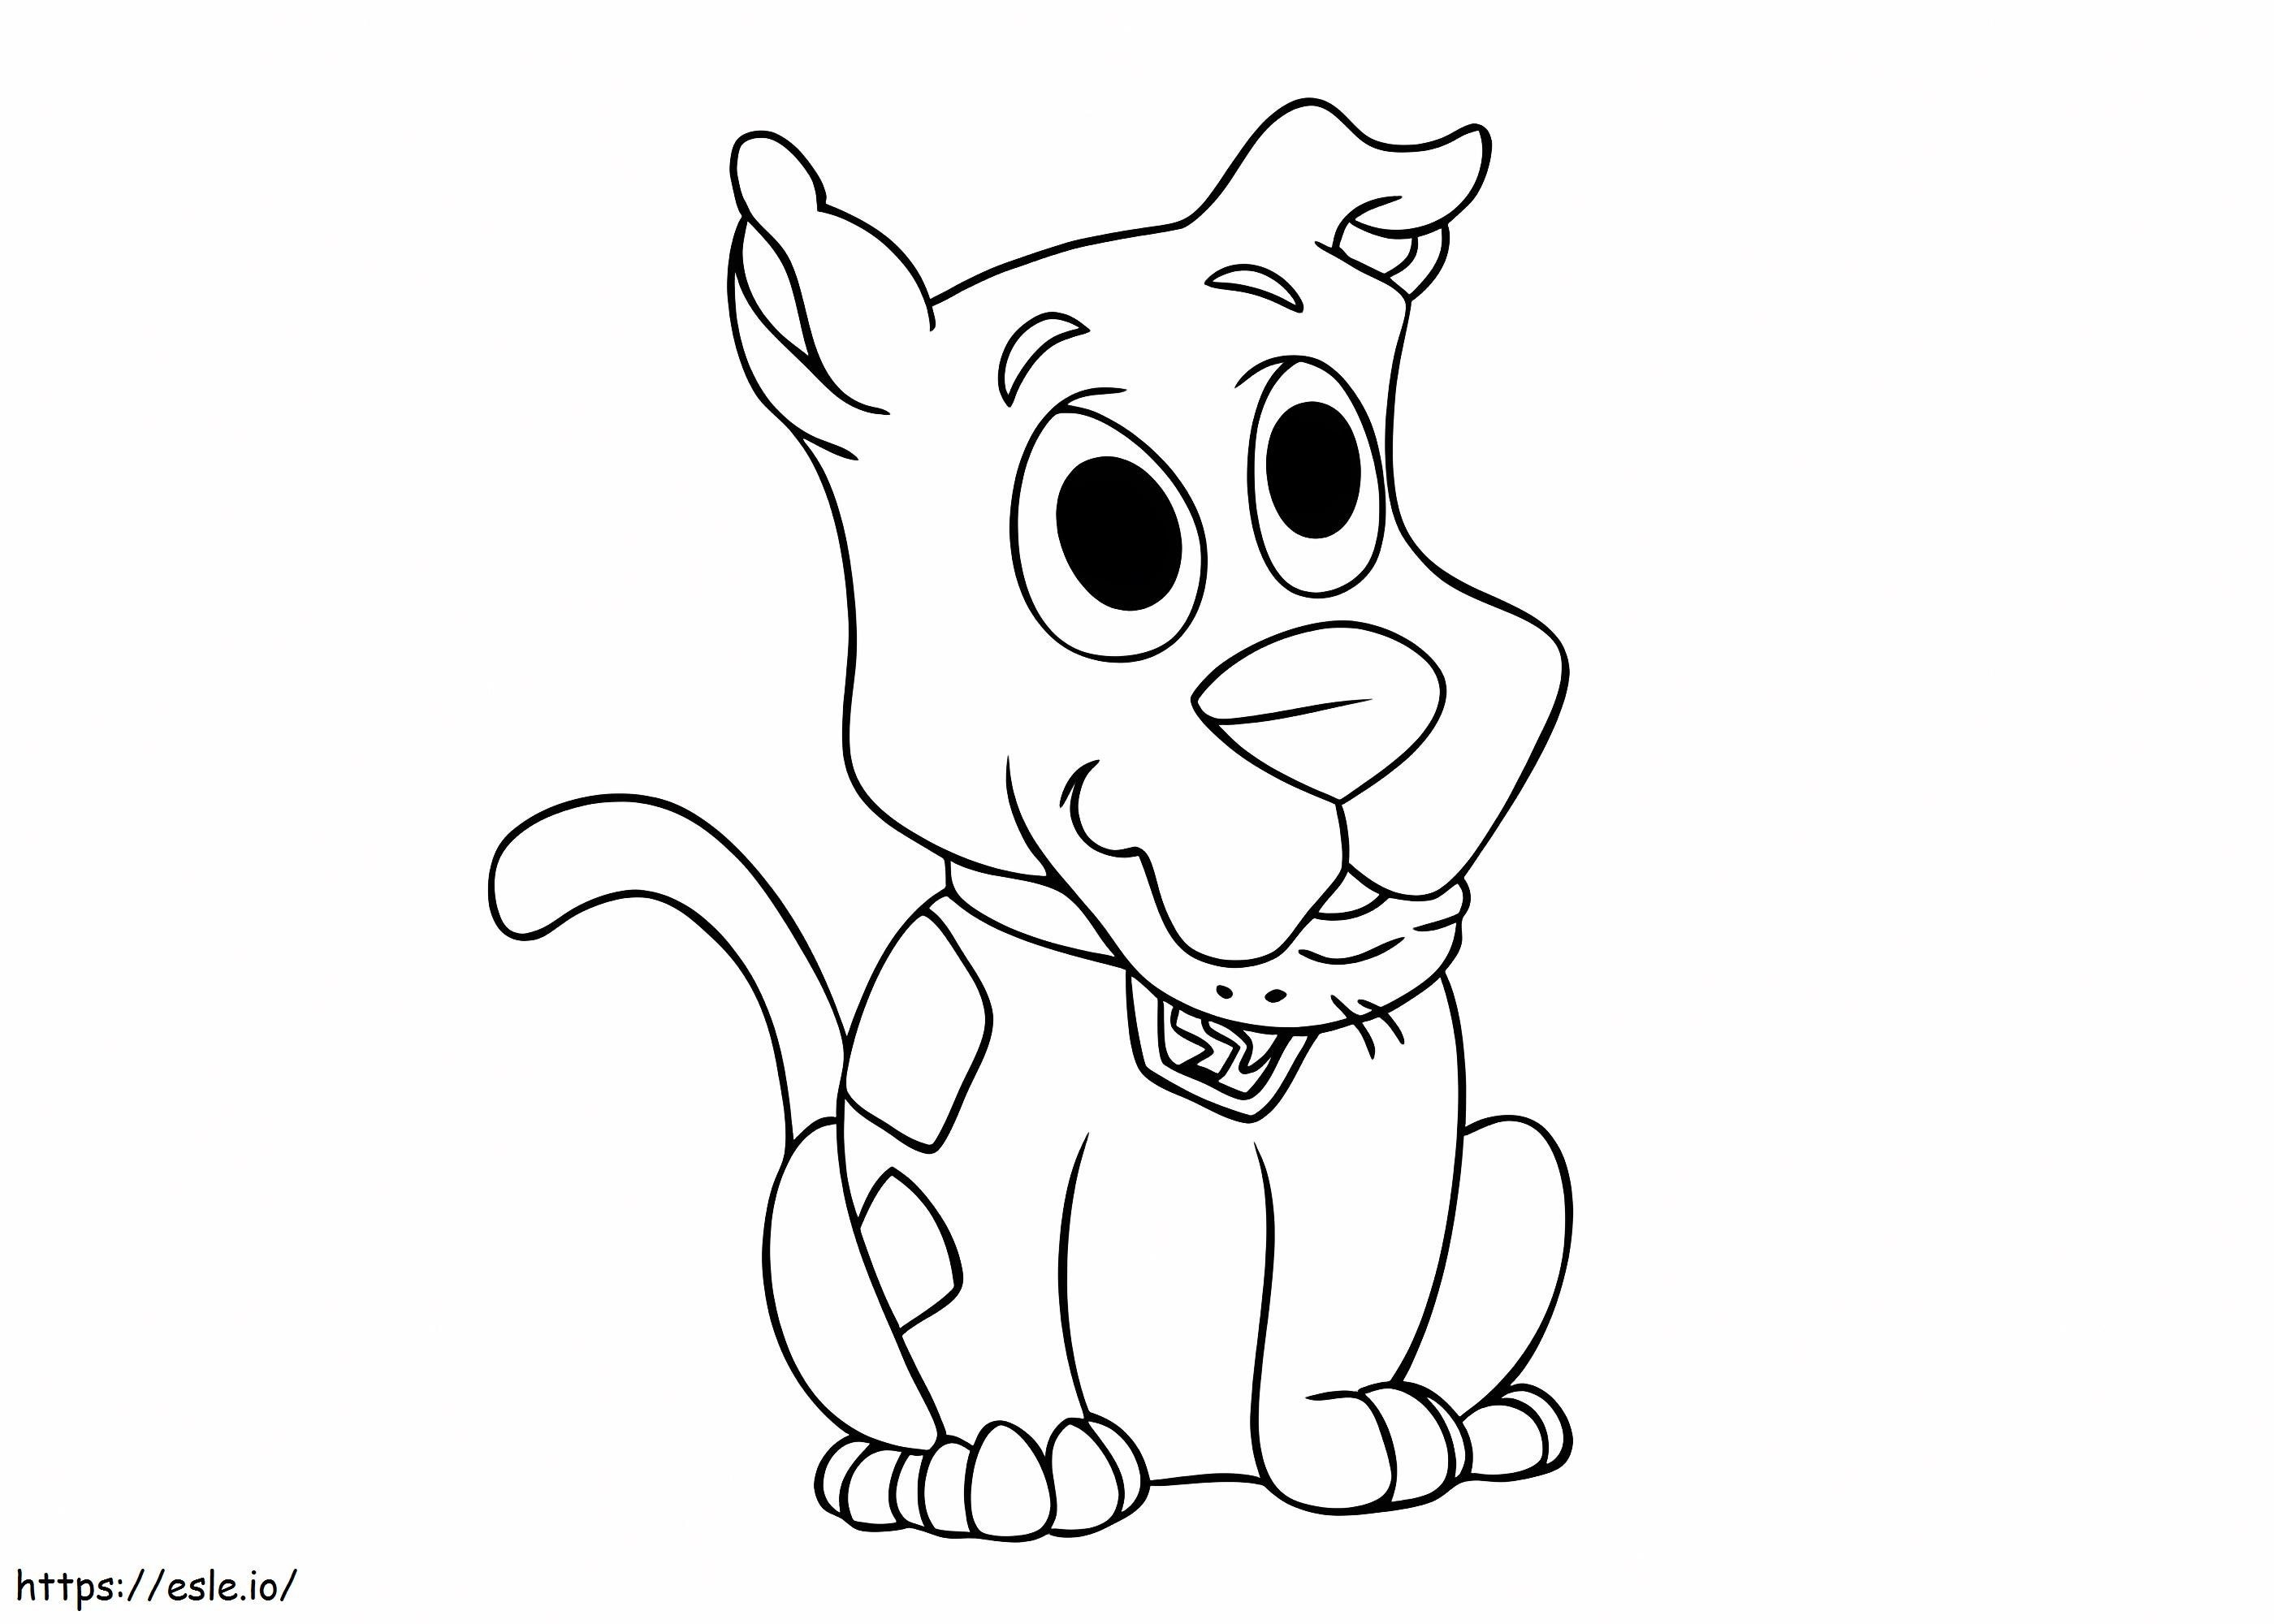 1532427948 Baby Scooby Doo A4 coloring page